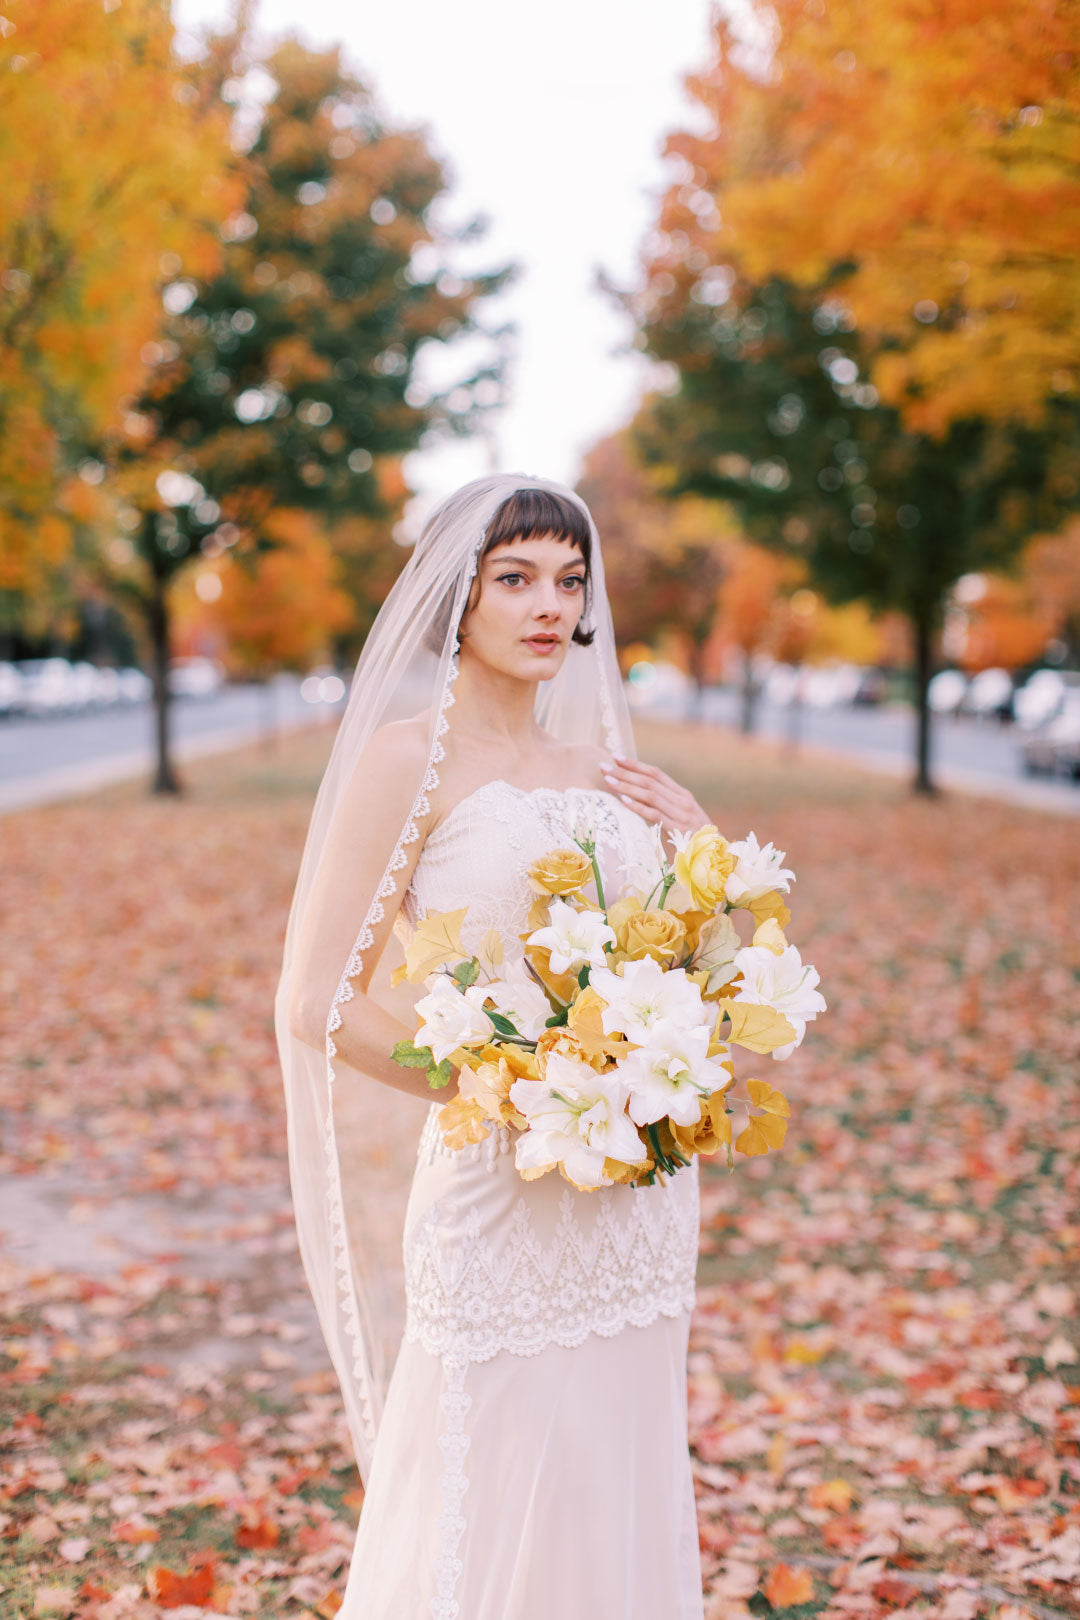 Bride holding wedding floral boquet with fall leaves